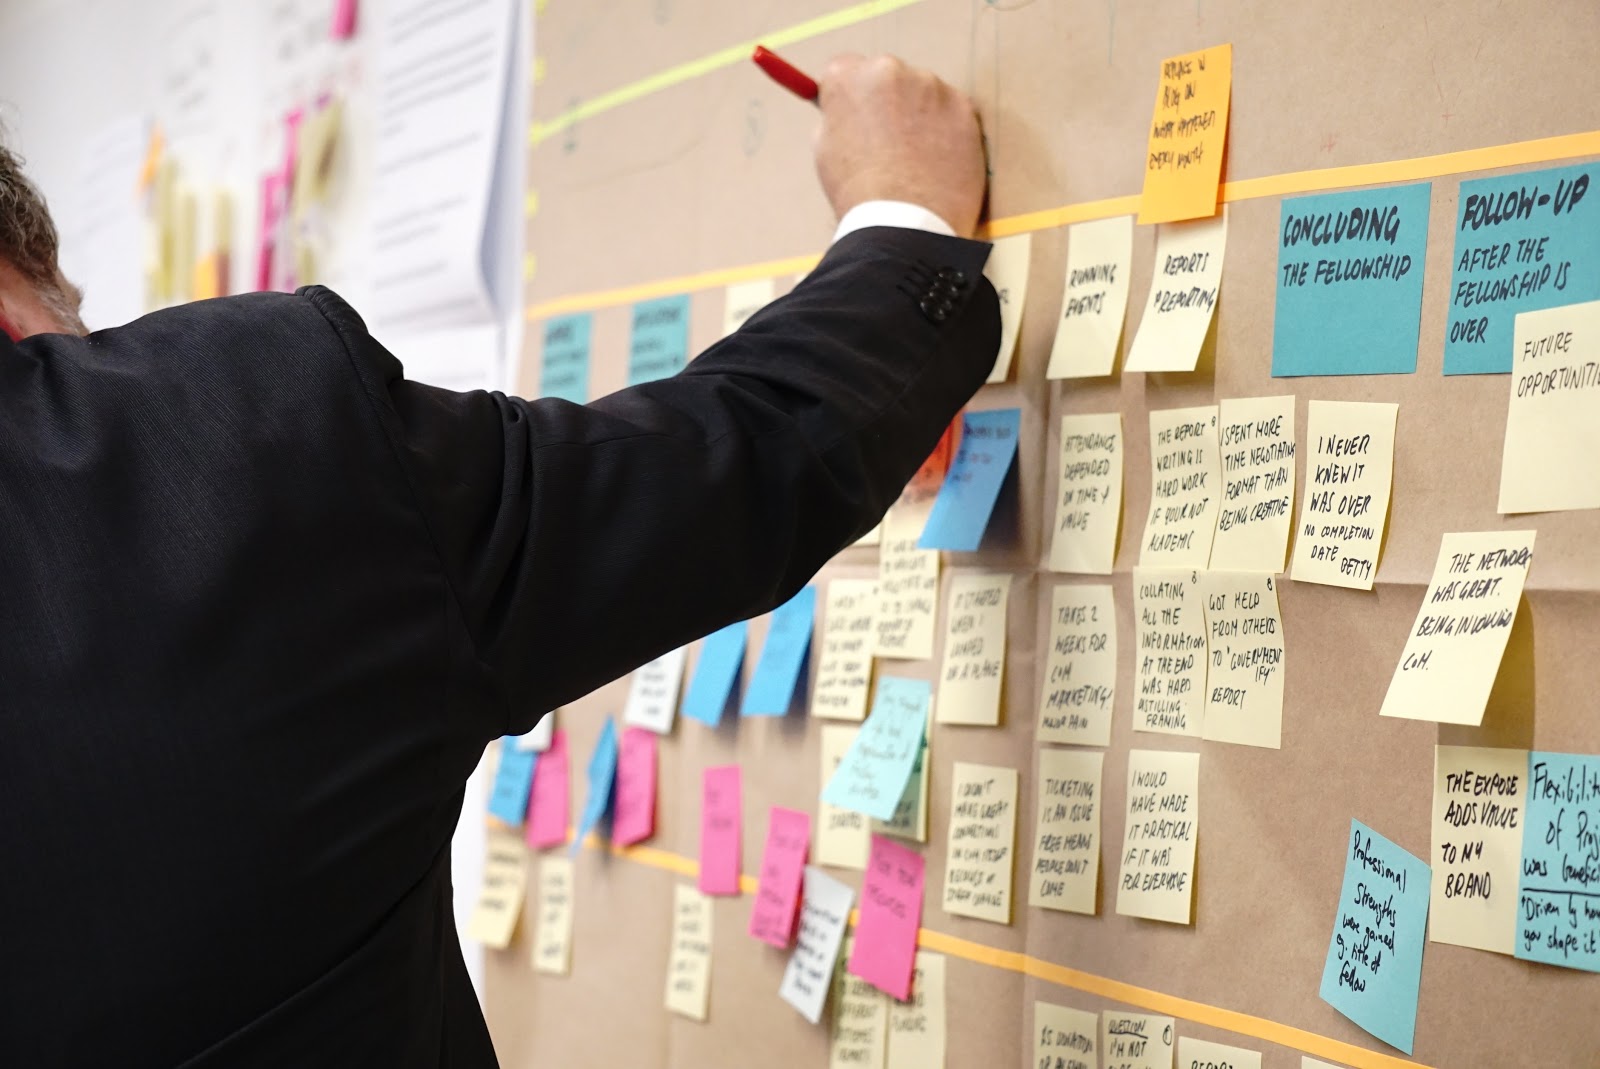 The Best Project Management Practices to Grow Your Business in an Efficient & Organized Way